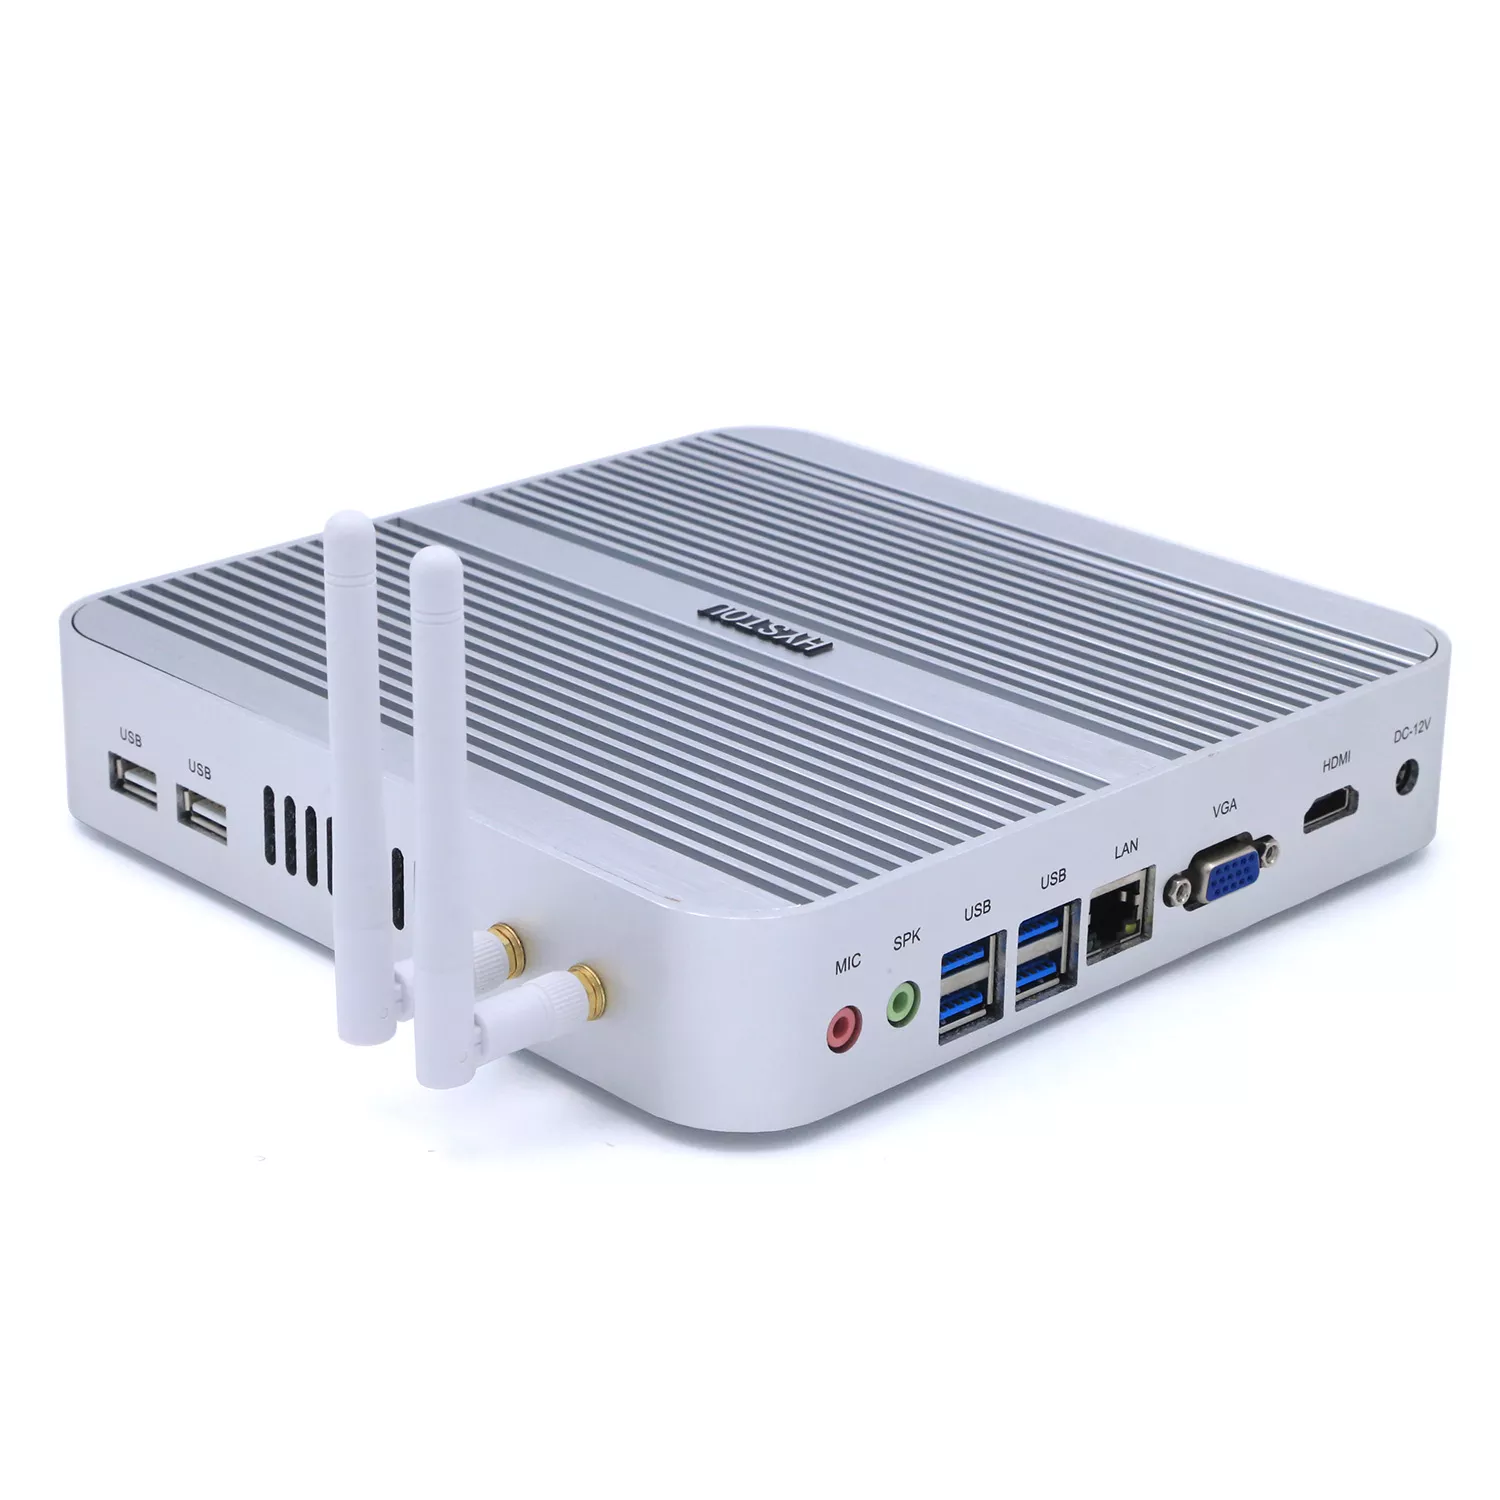 37mm Body Thickness Low Power Eco-friendly Fanless PC